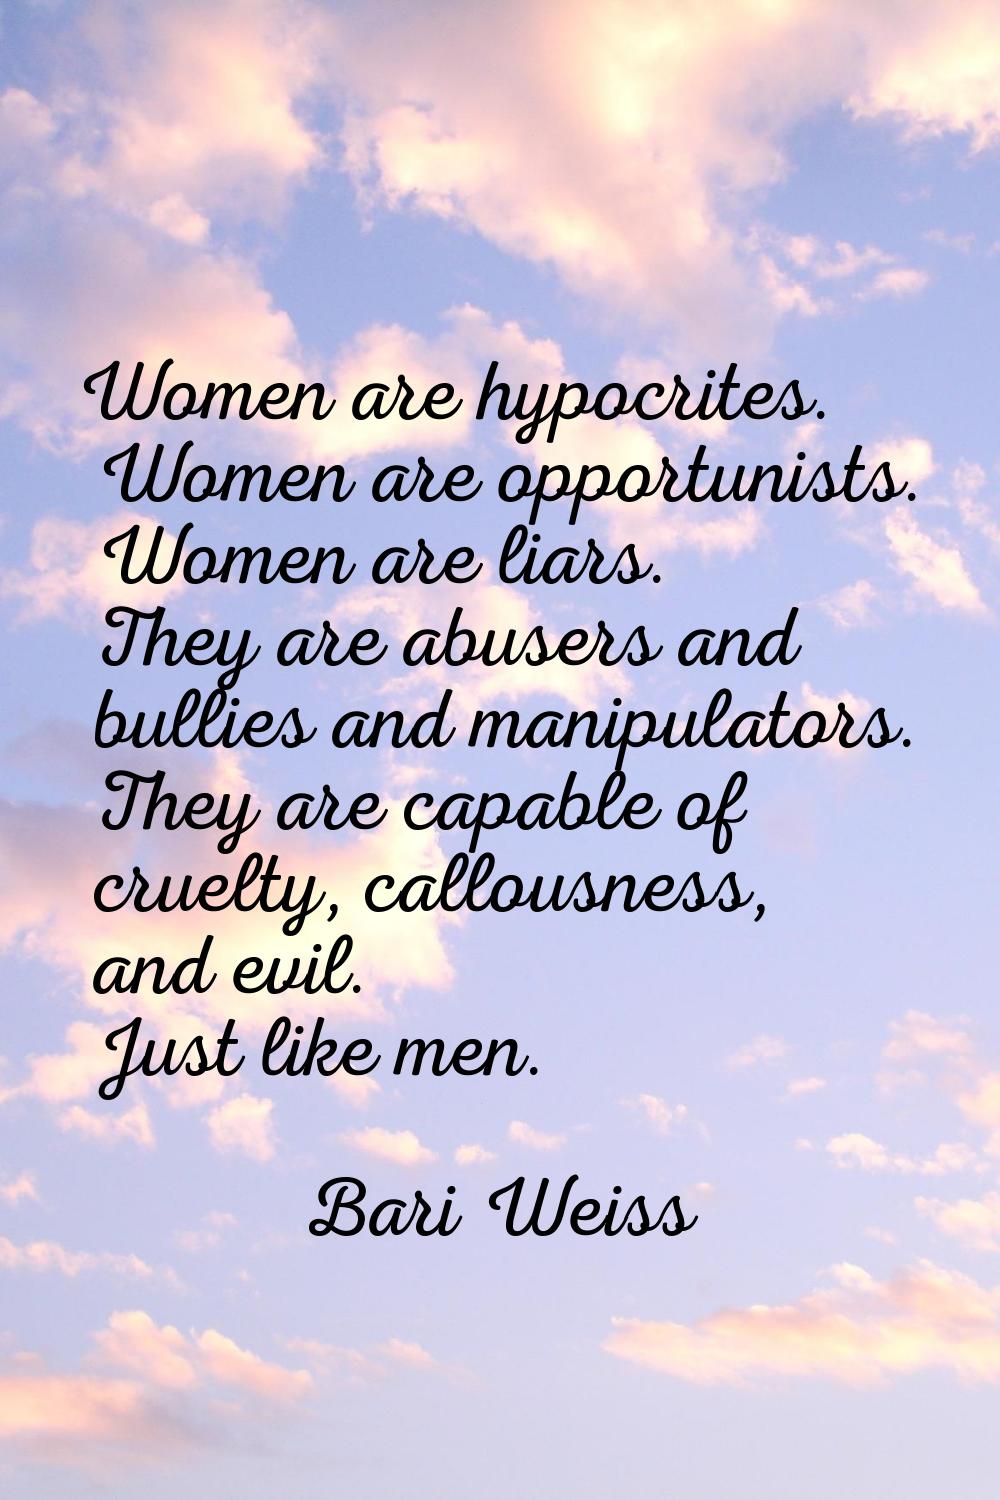 Women are hypocrites. Women are opportunists. Women are liars. They are abusers and bullies and man